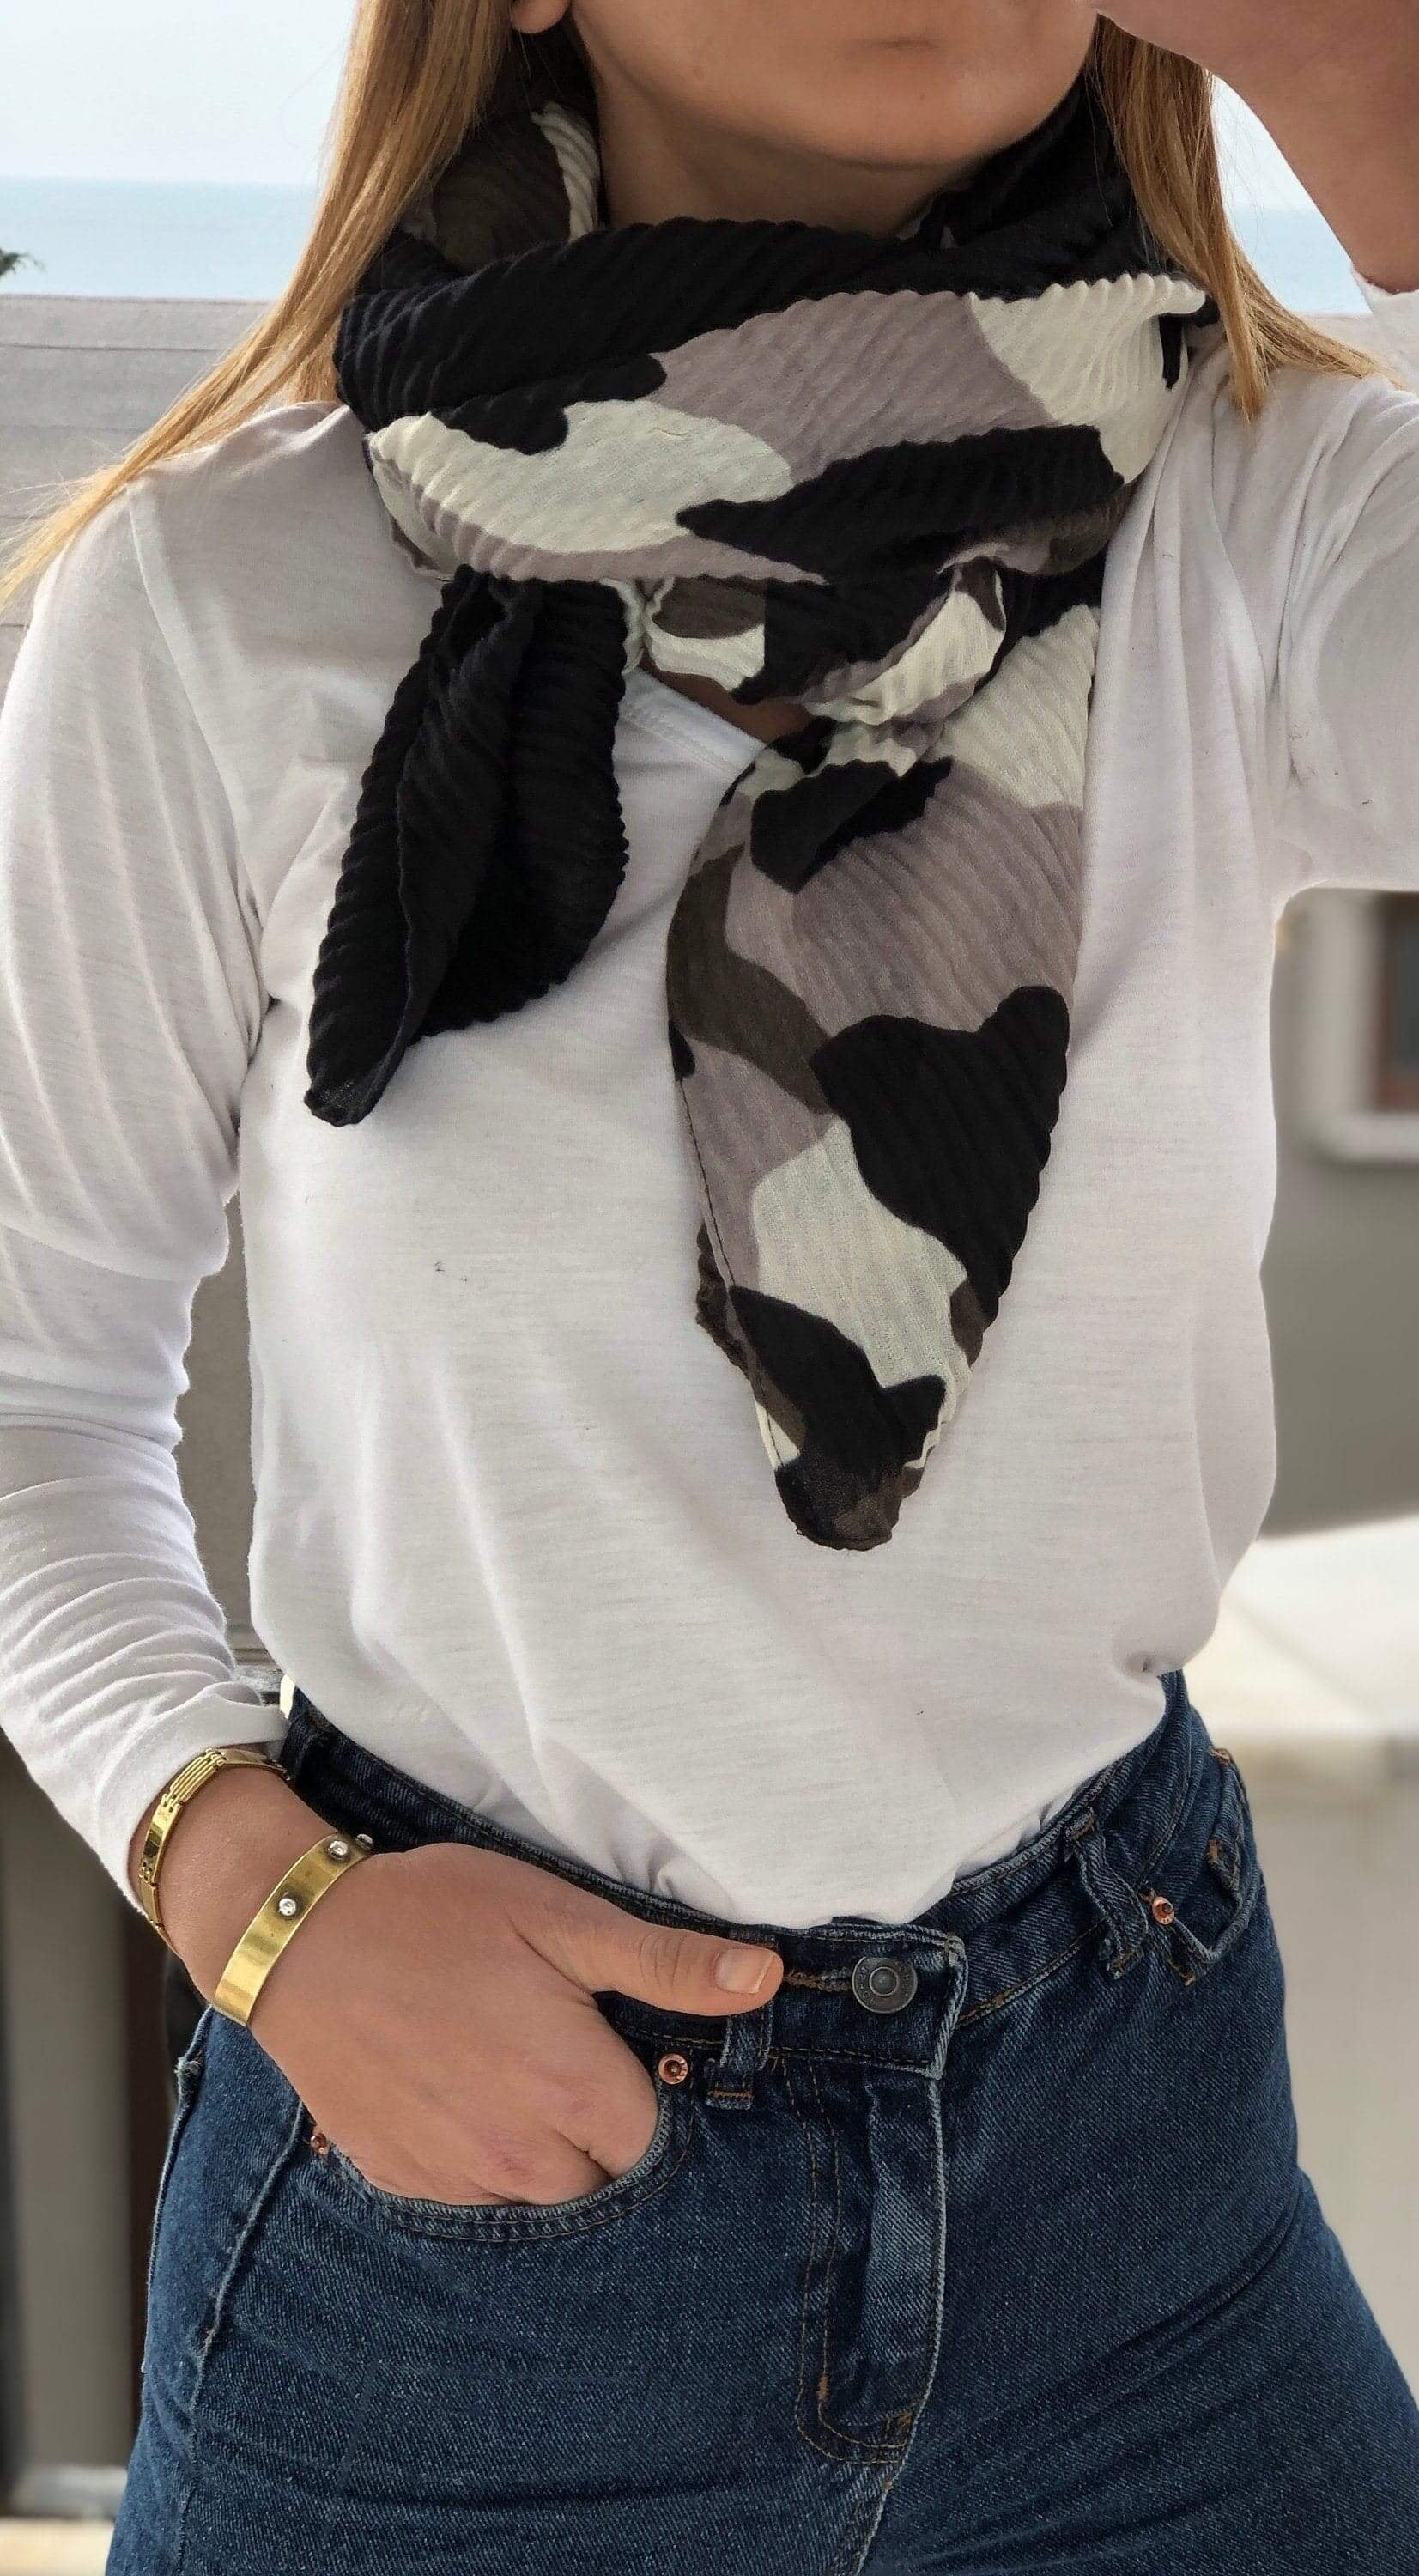 Stay cozy and on-trend with this dark-colored camouflage patterned scarf.